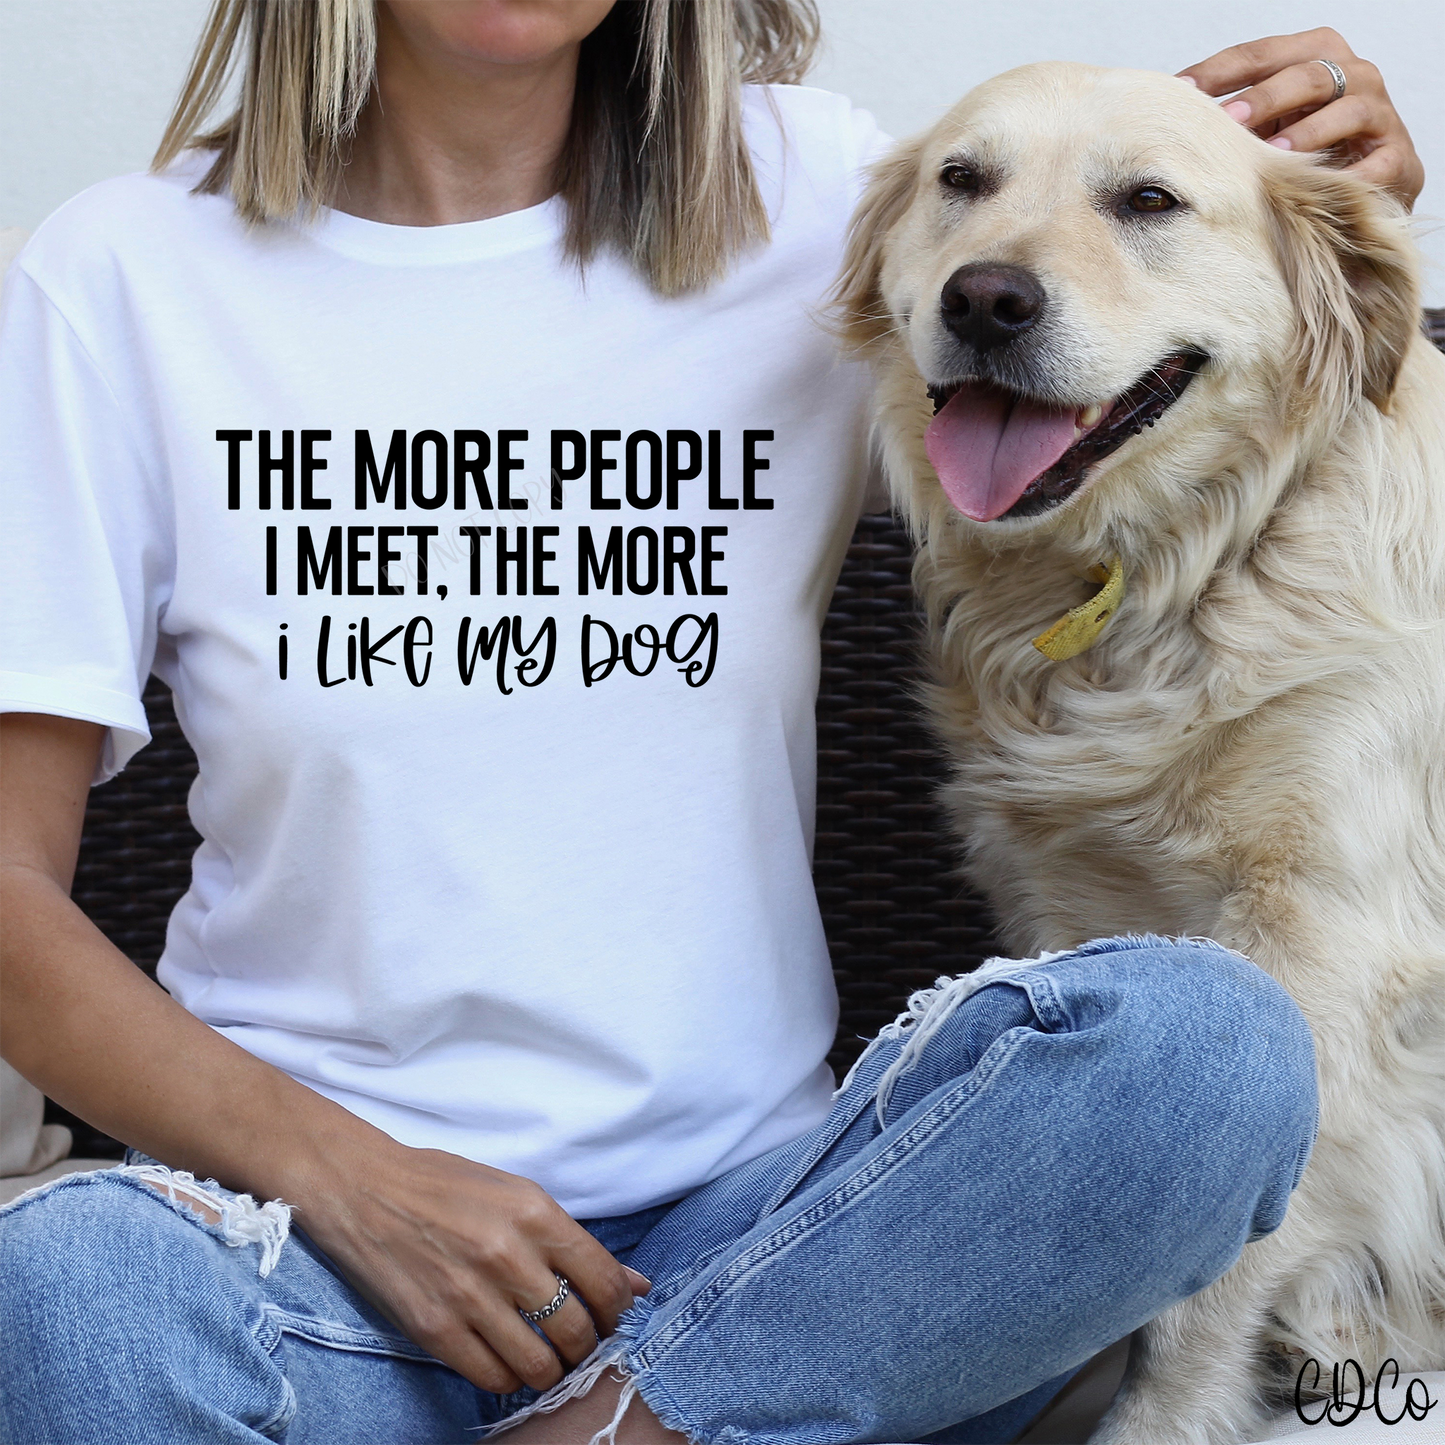 The More People I Meet the More I Like My Dog (325°)